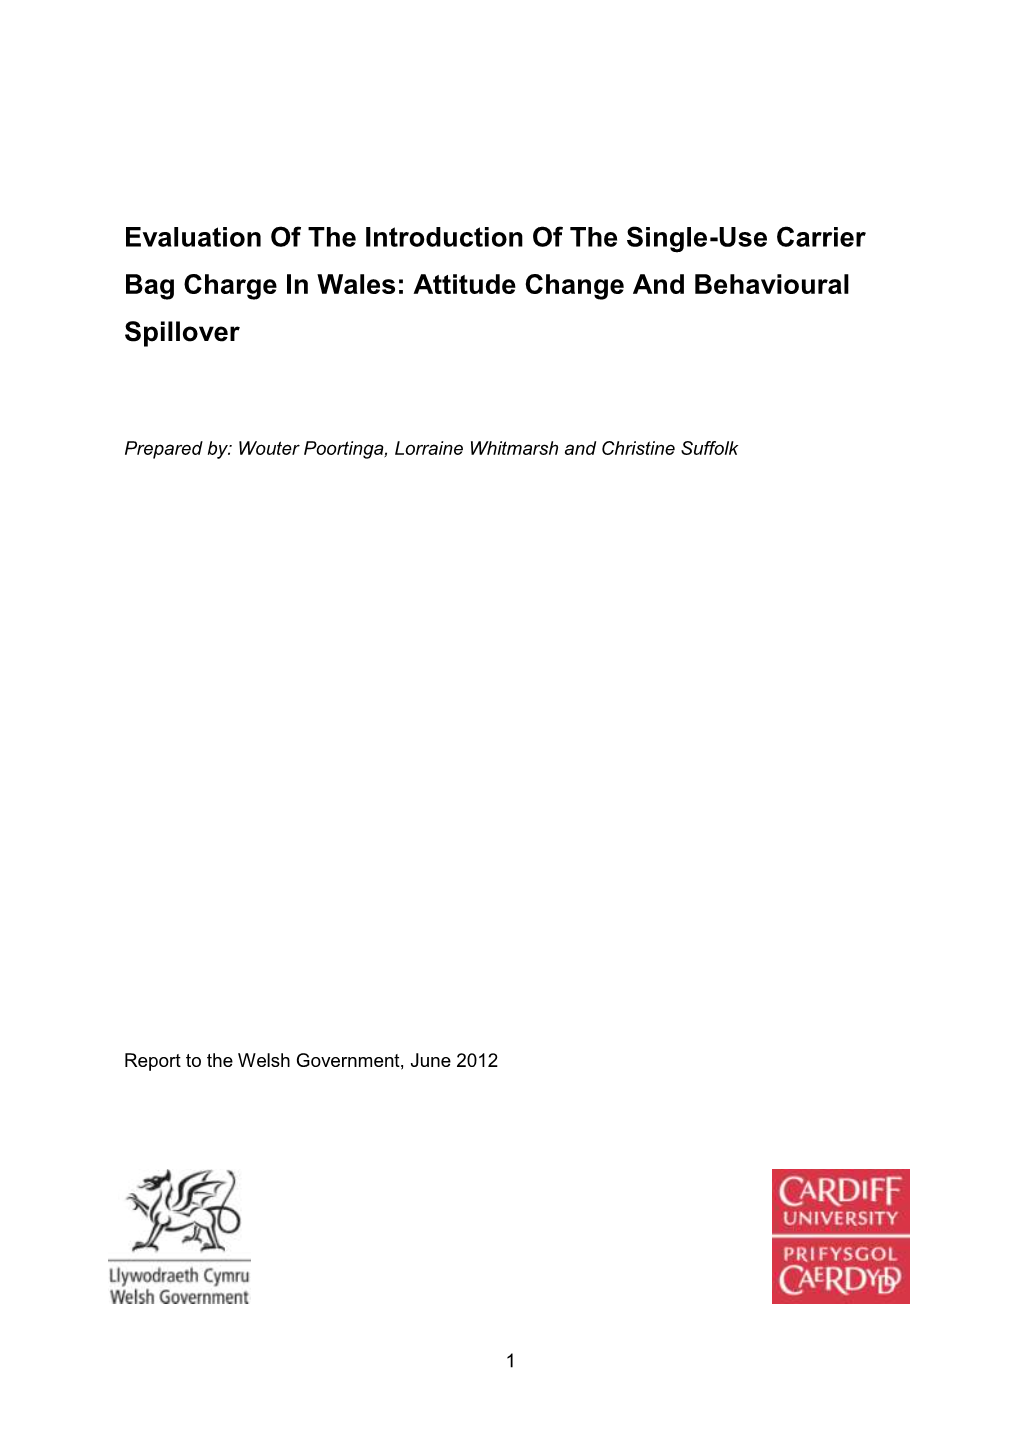 Evaluation of the Introduction of the Single-Use Carrier Bag Charge in Wales: Attitude Change and Behavioural Spillover